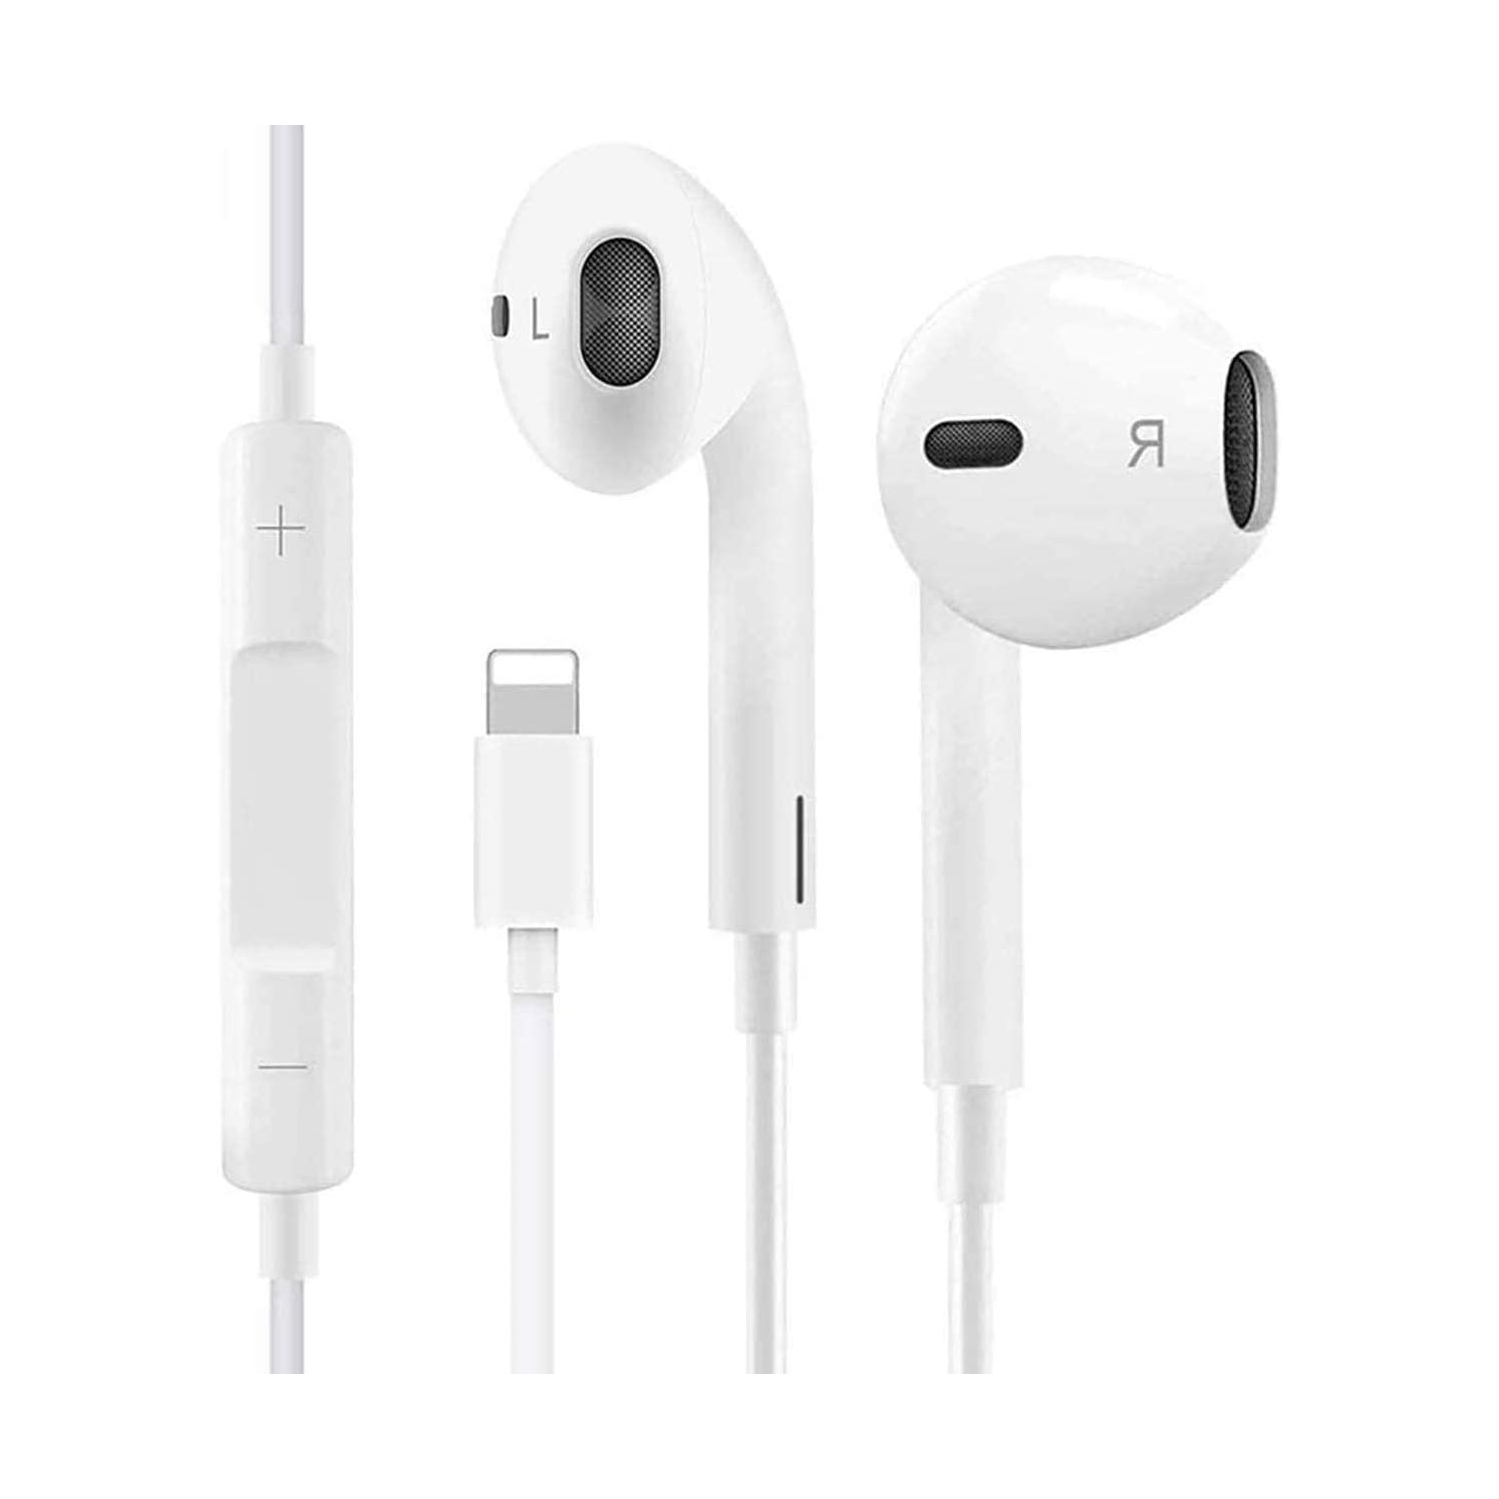 (CABLESHARK) Apple iPhone COMPATIBLE Headphones Earphones Earbuds with Volume Buttons & Mic for iPhone 7 8 Plus X 11 12 13 Pro Max (FREE SHIPPING)